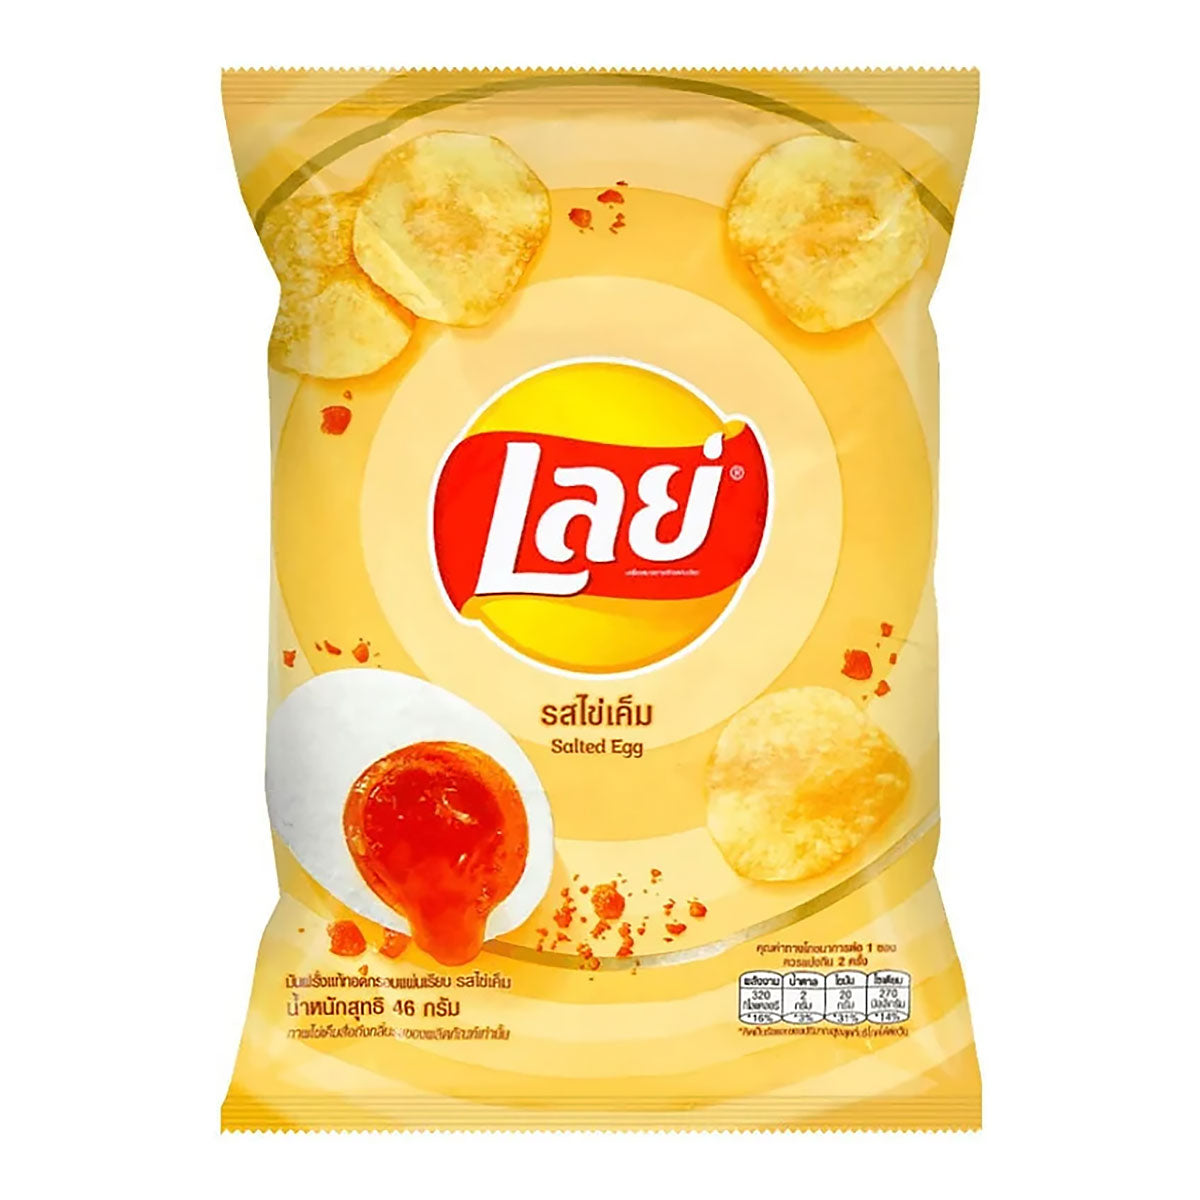 lay's potato chips salted egg flavor - 1.62oz